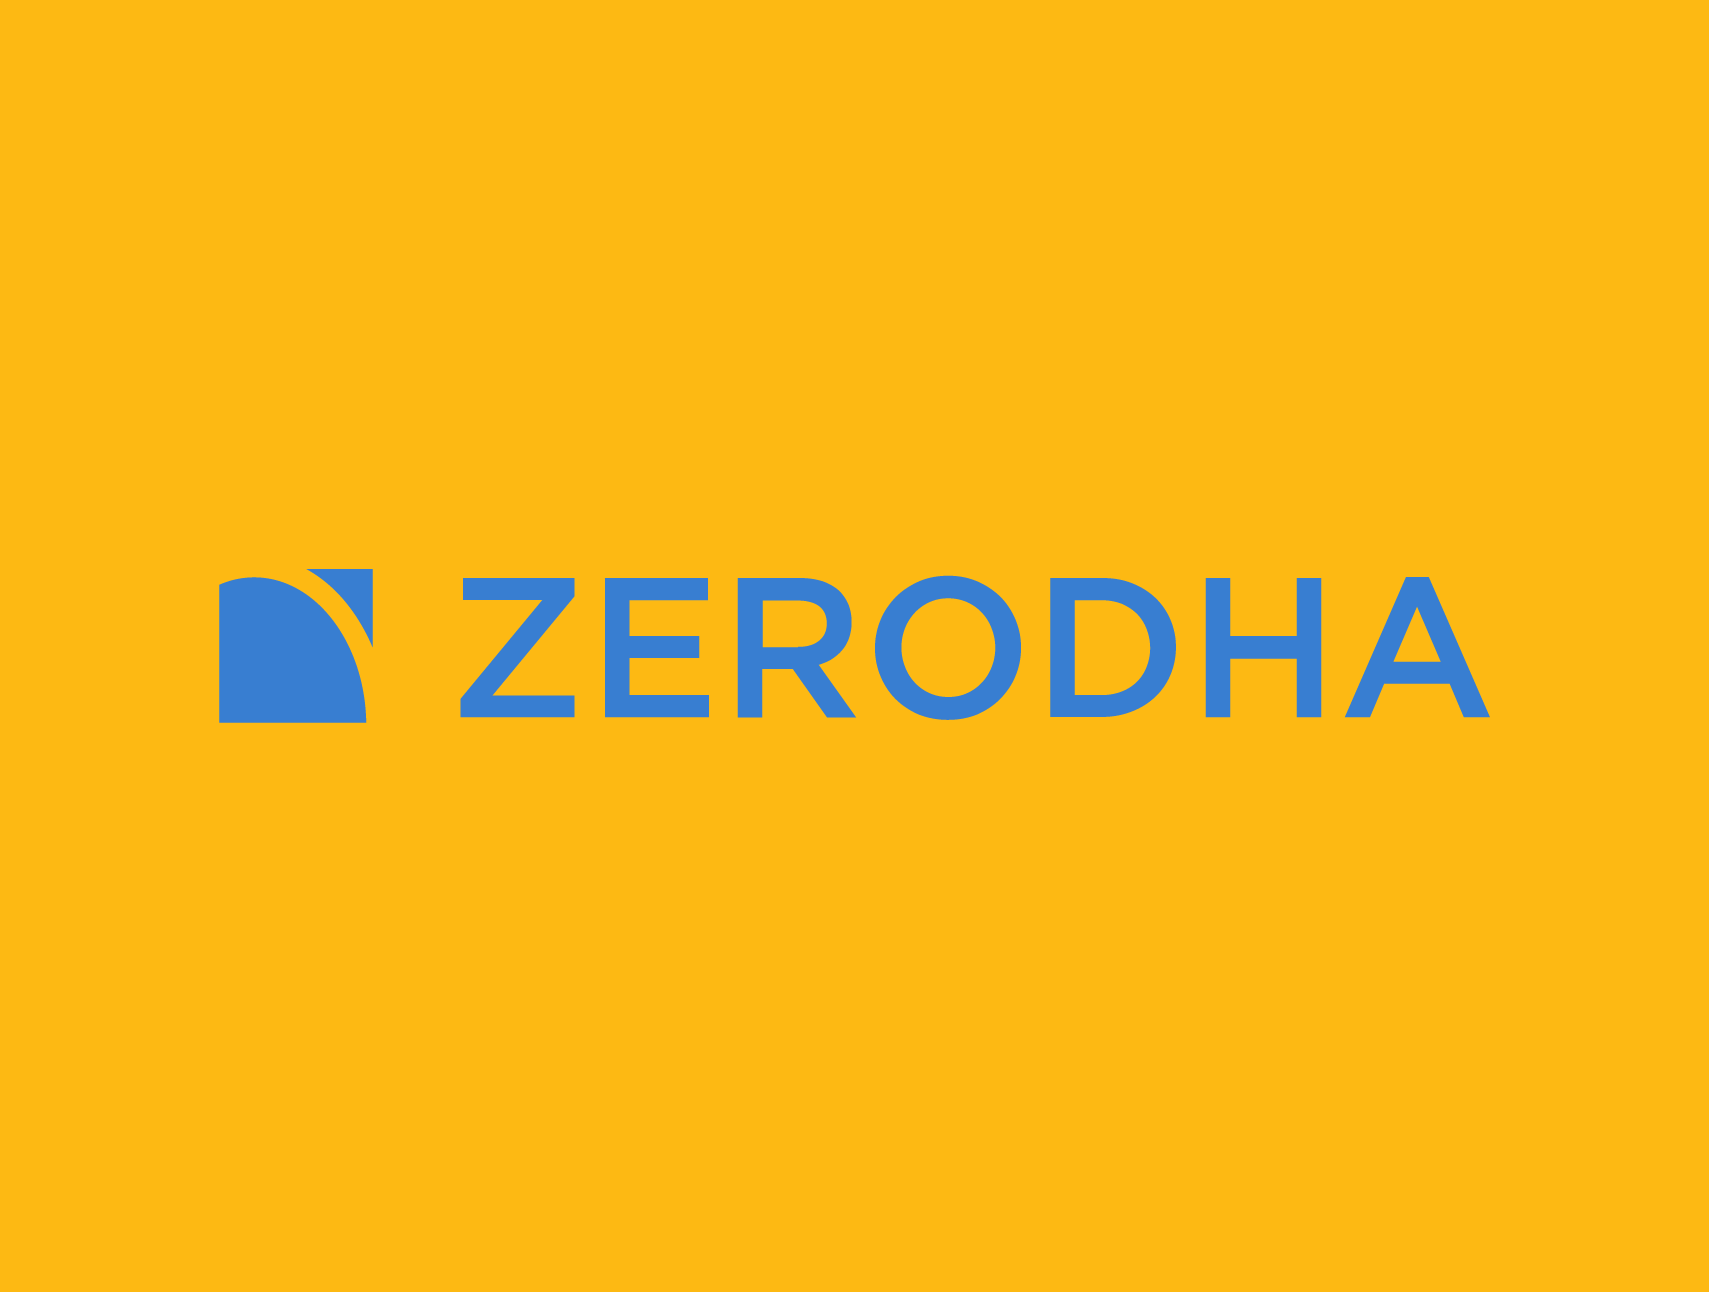 Zerodha | Enthusing Work From Home